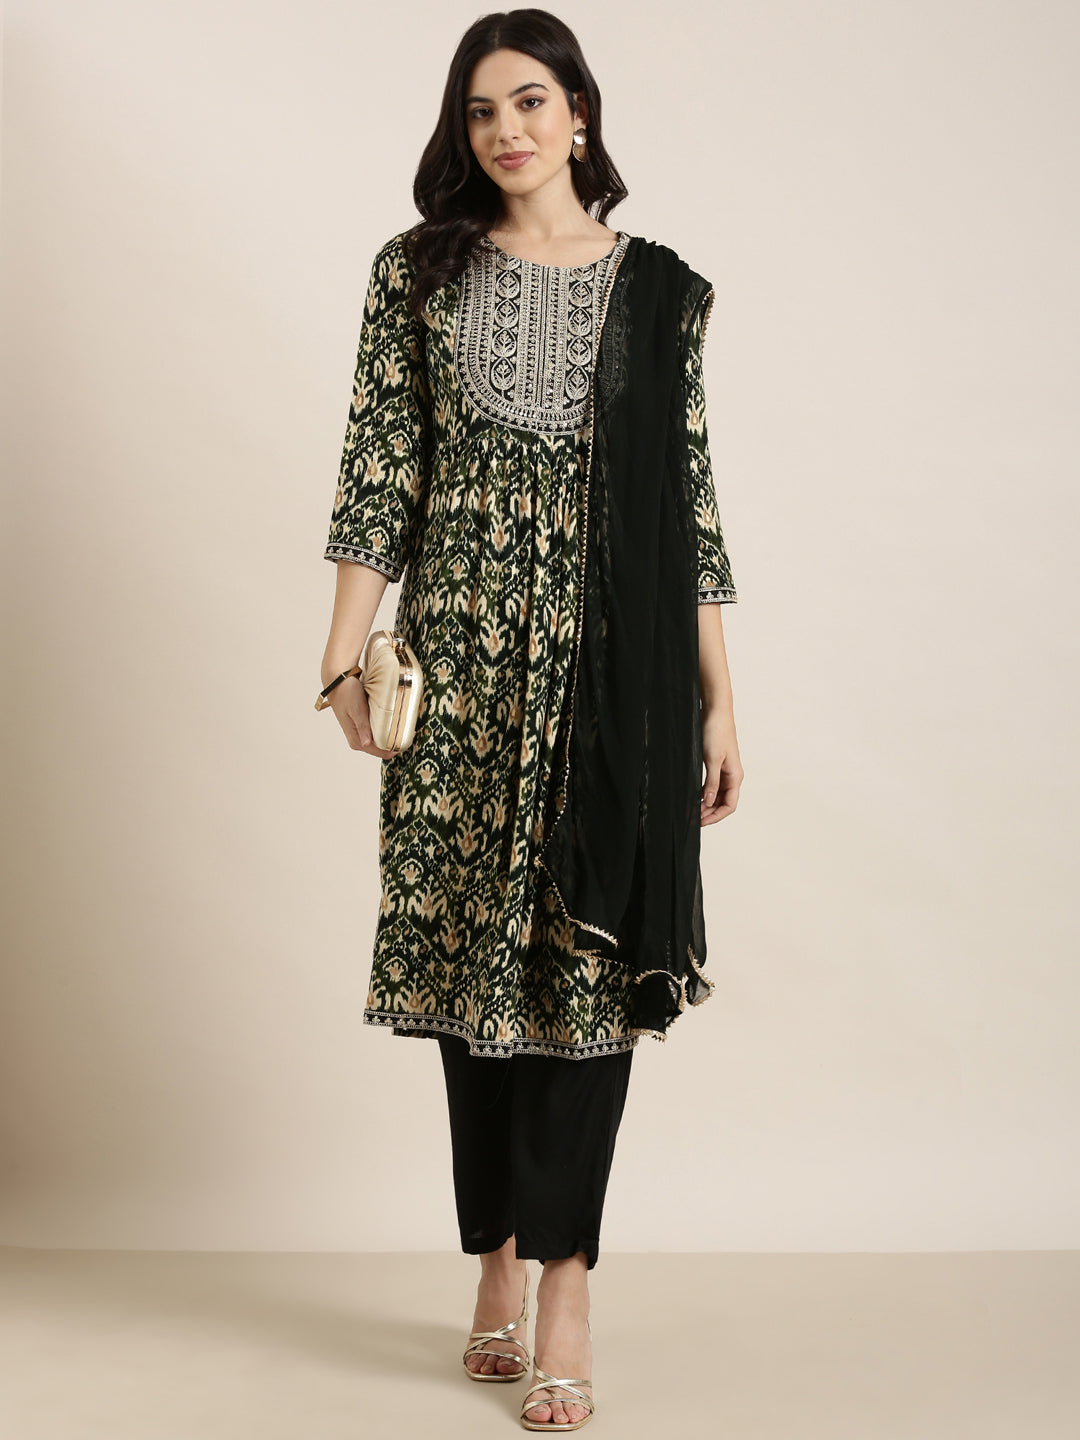 Women A-Line Green Ethnic Motifs Kurta and Trousers Set Comes With Dupatta